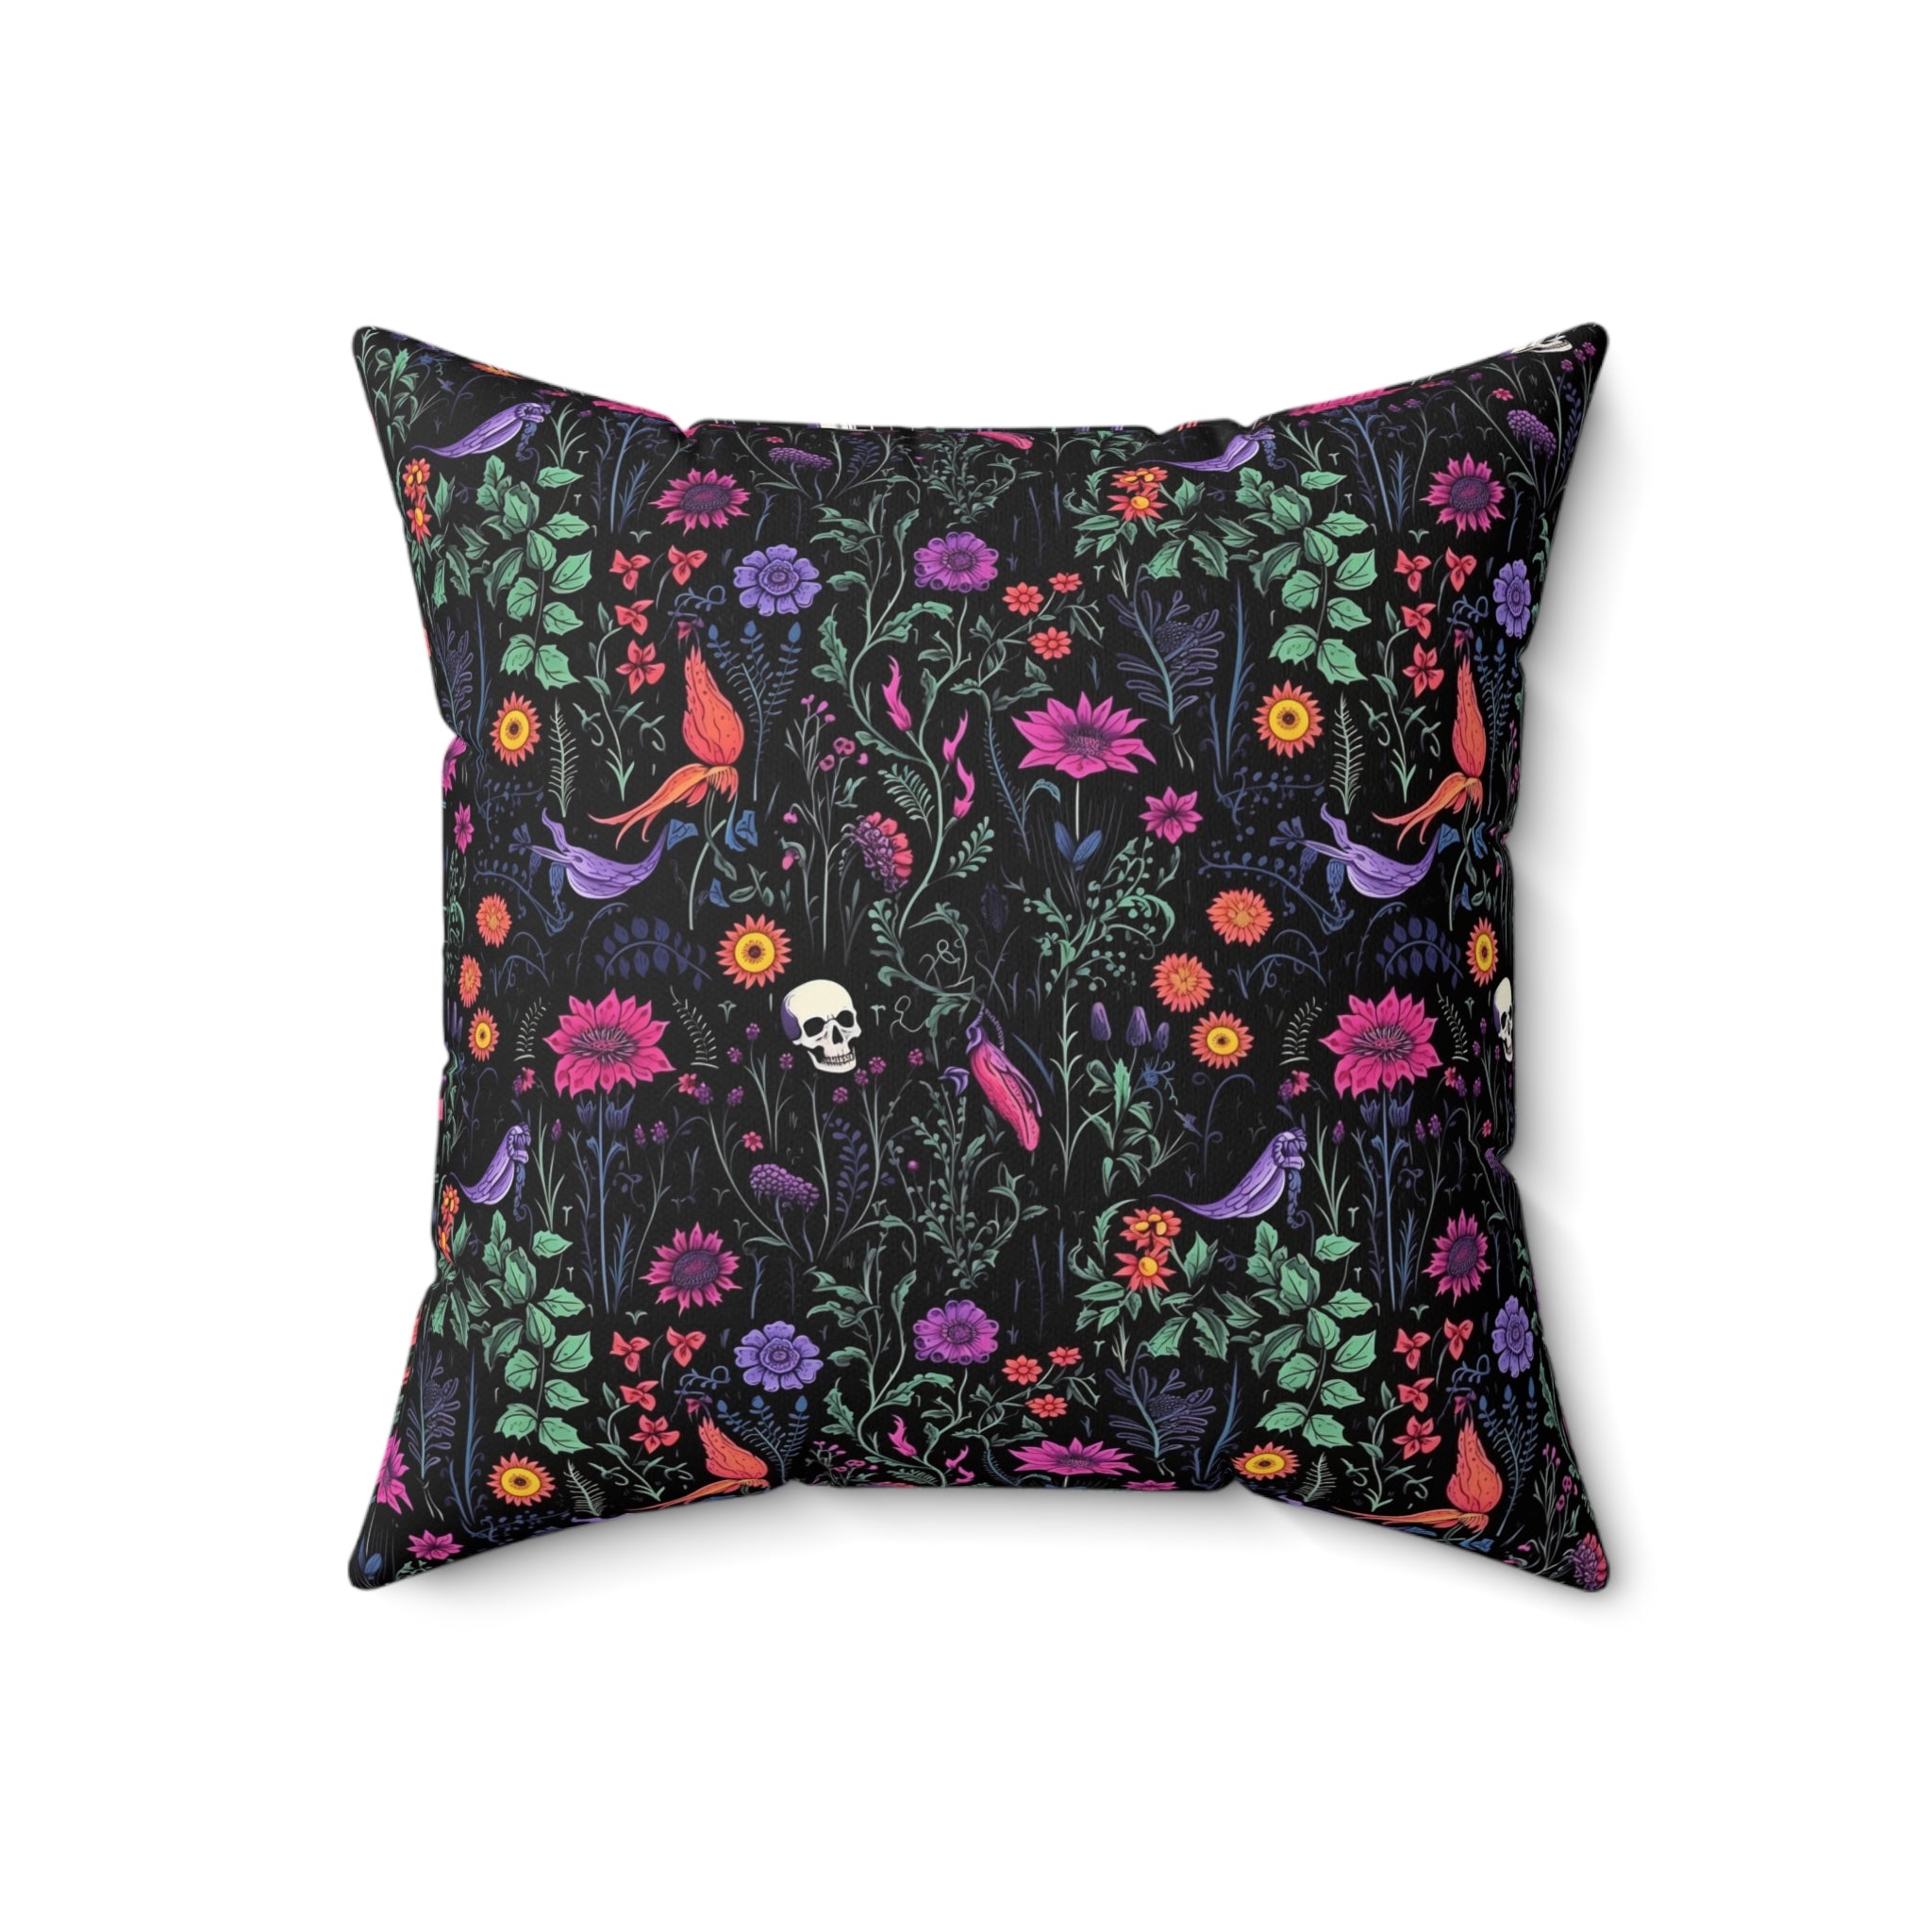 Eerie Wildflower Faux Suede Pillow Cover with Skull